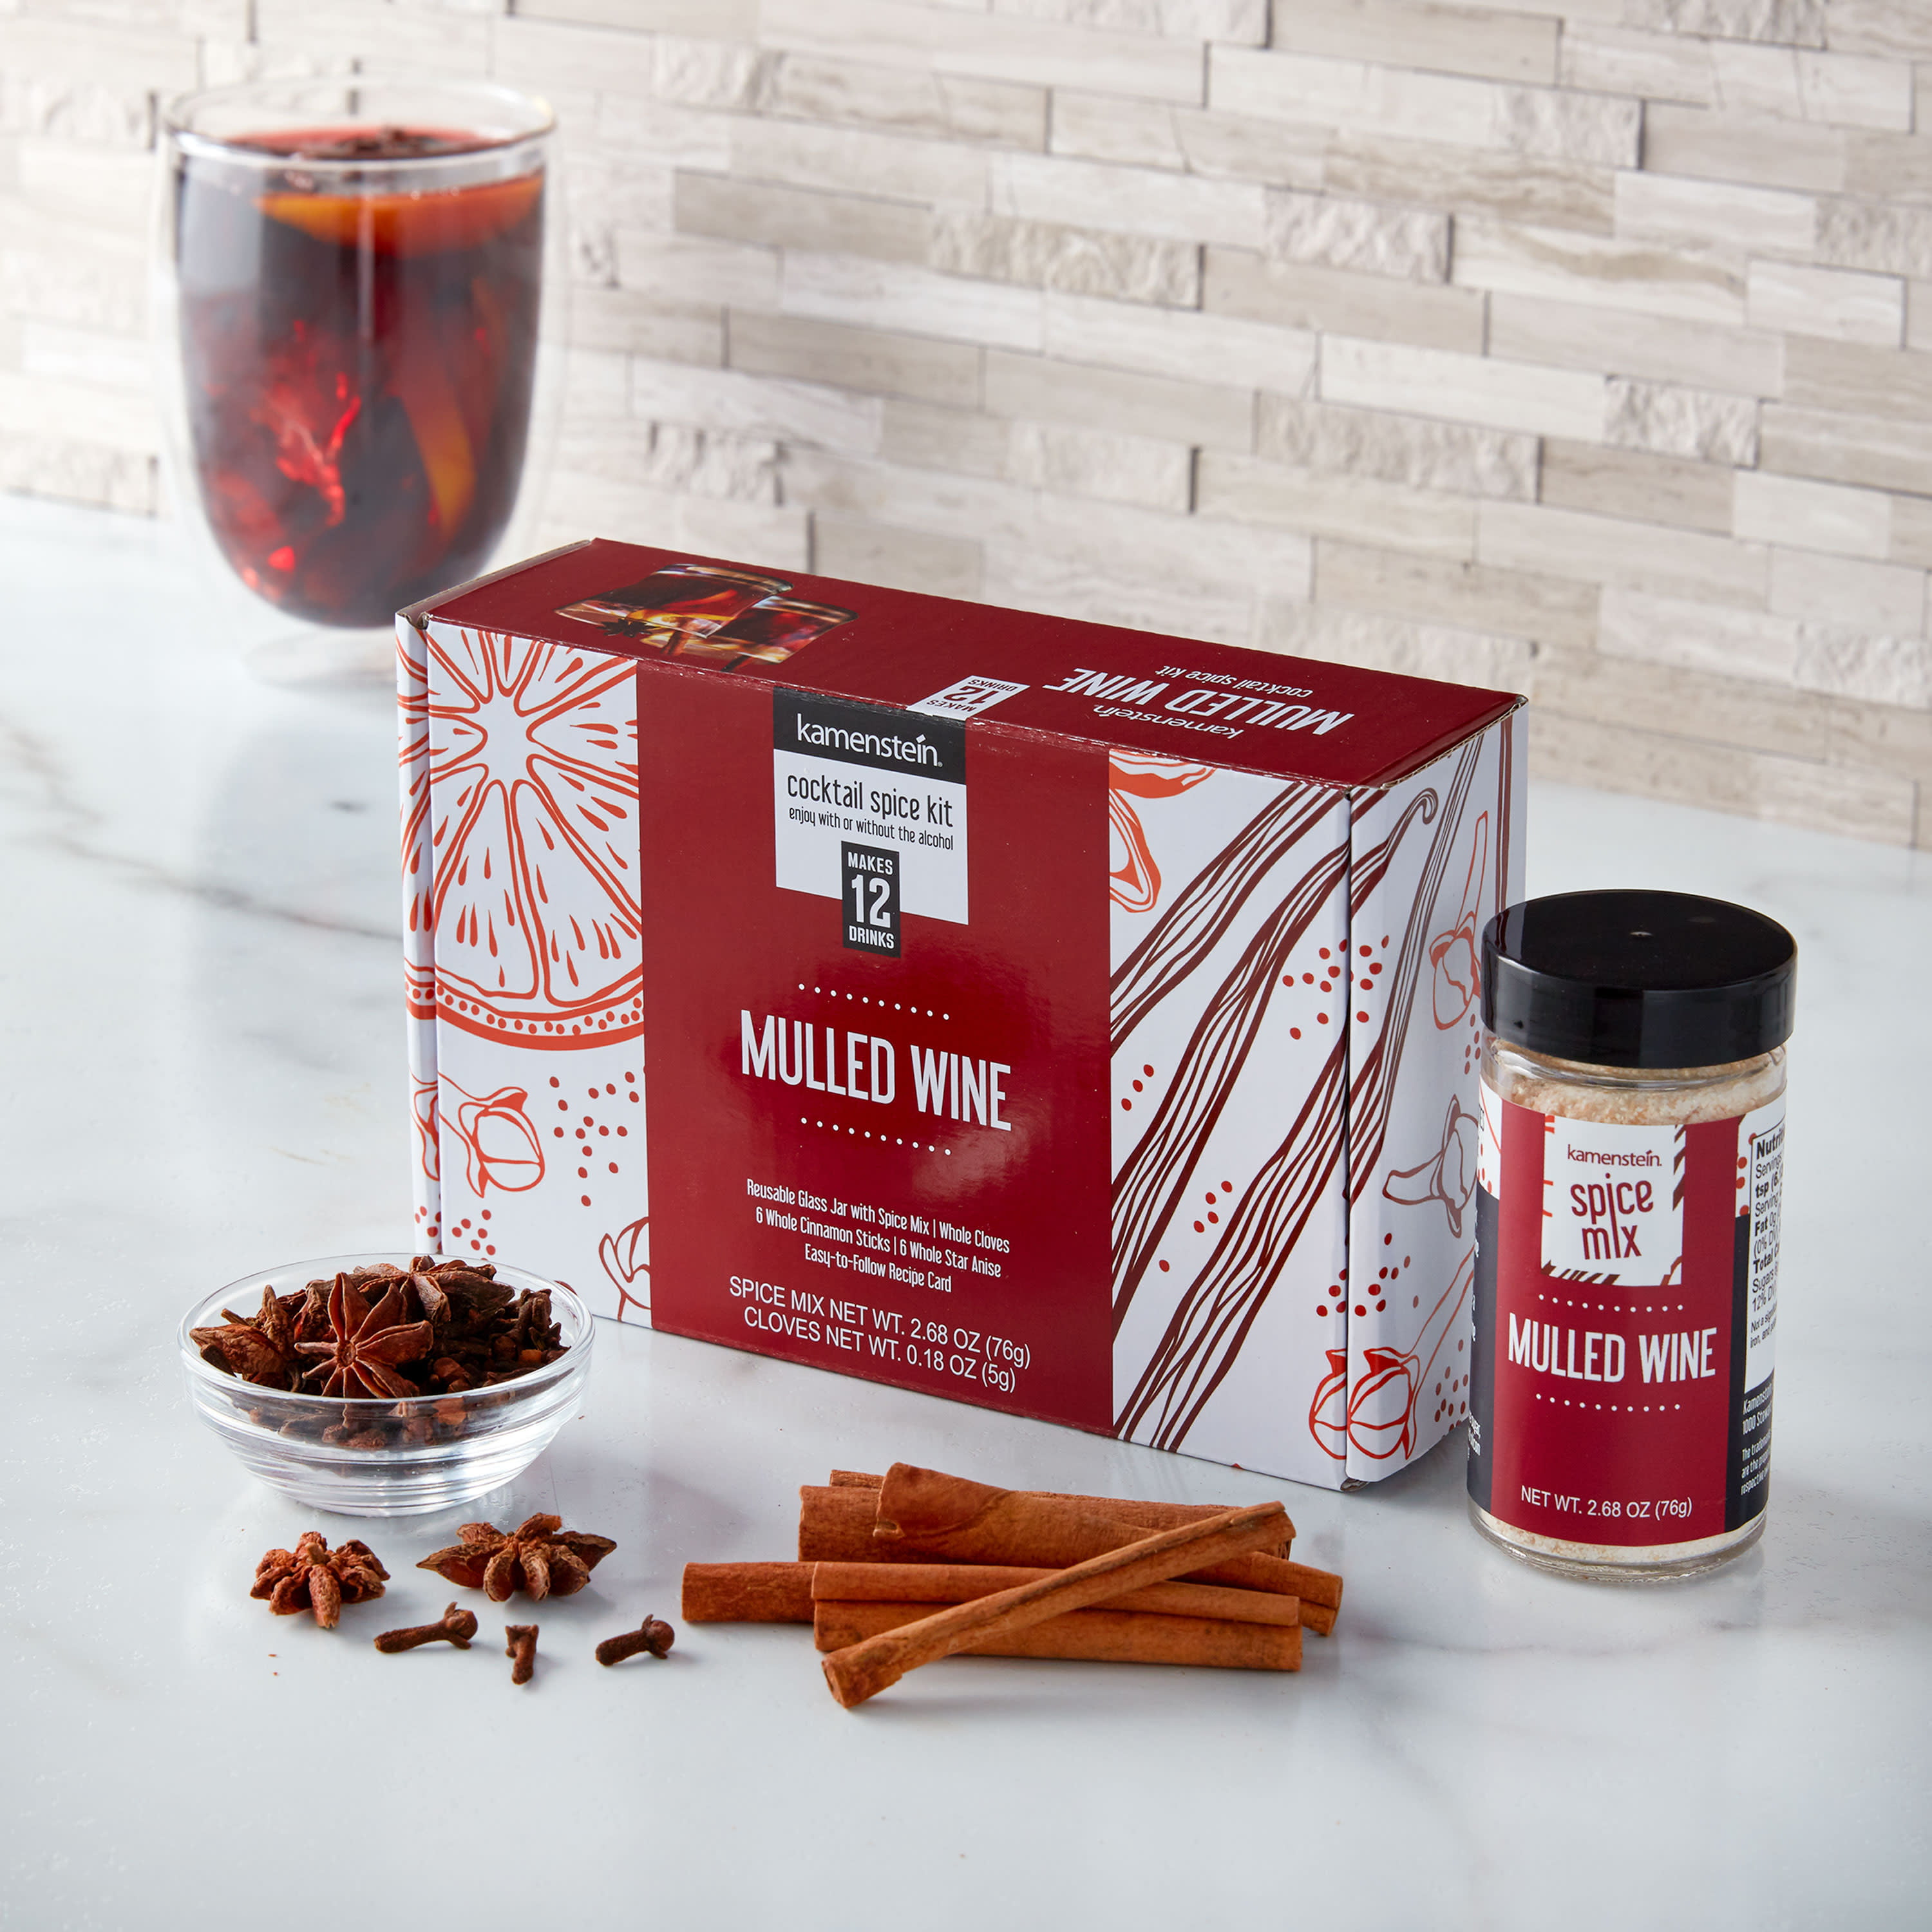 Cooking Gift Set Mulled Wine Cocktail Kit